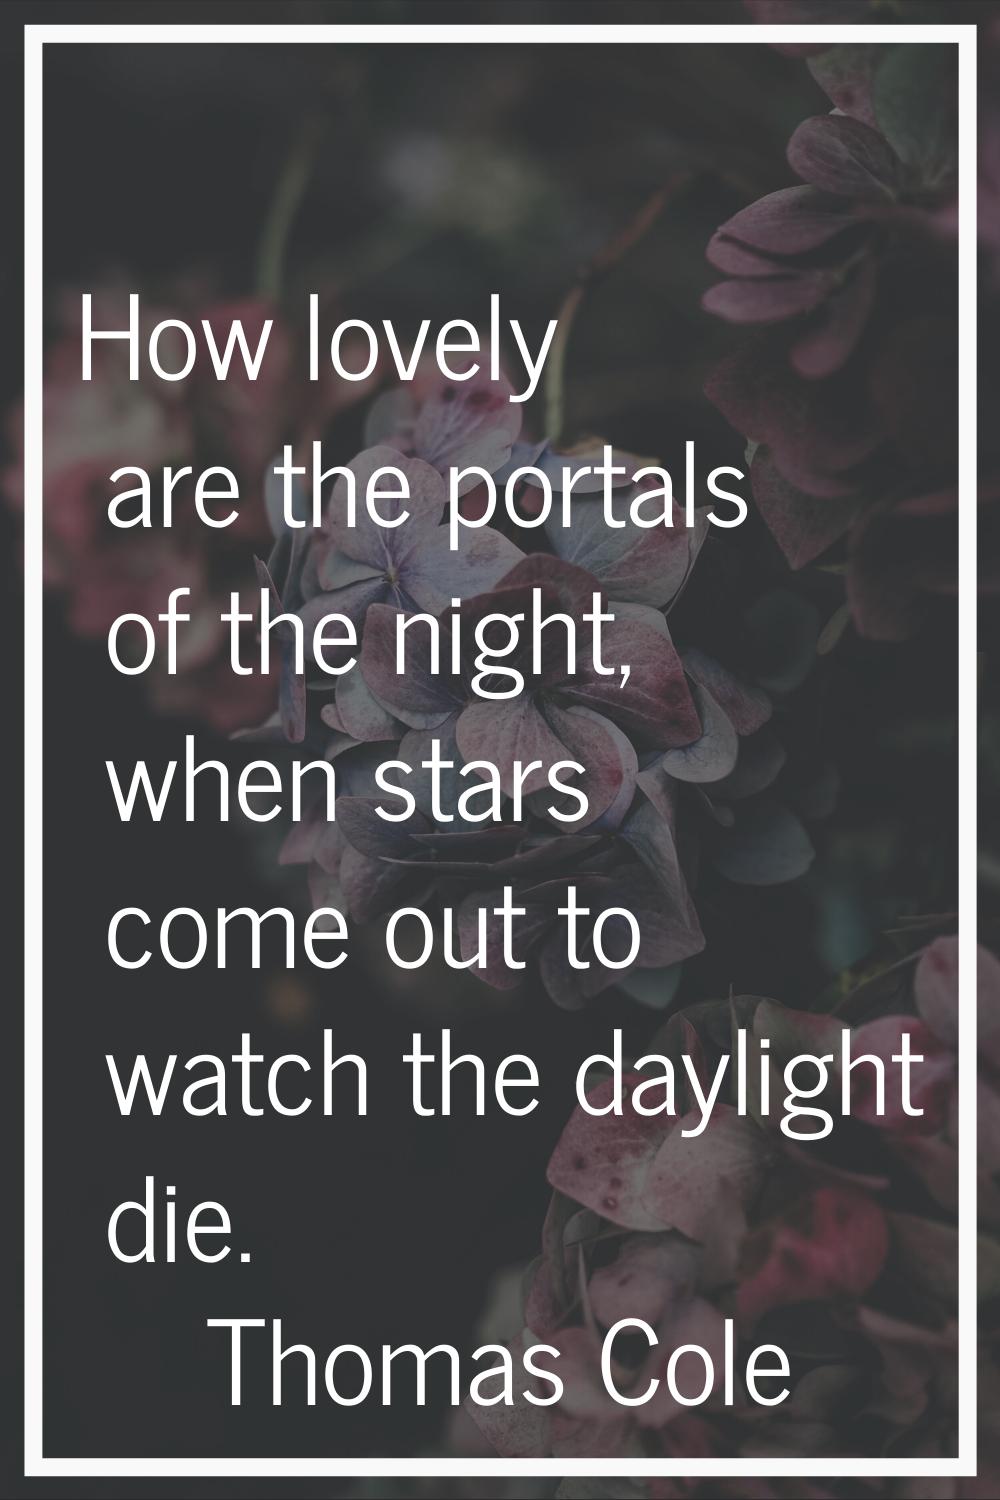 How lovely are the portals of the night, when stars come out to watch the daylight die.